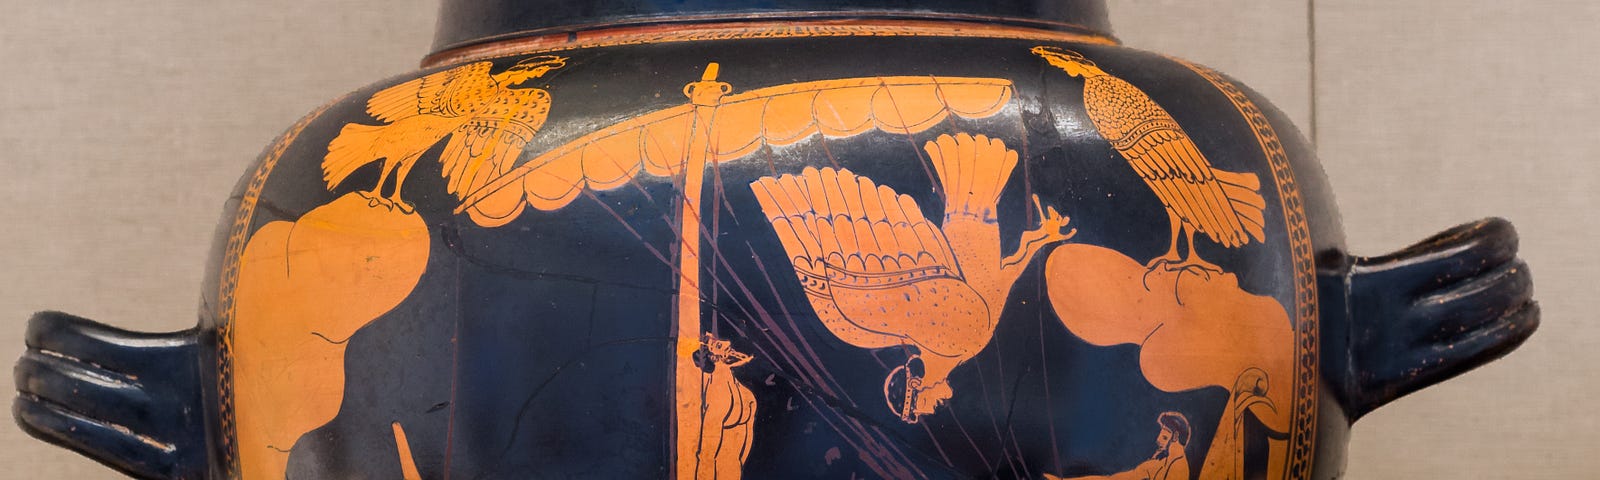 Large red-figure amphora with an image of Odysseus tied to a mast, taunted by sirens.